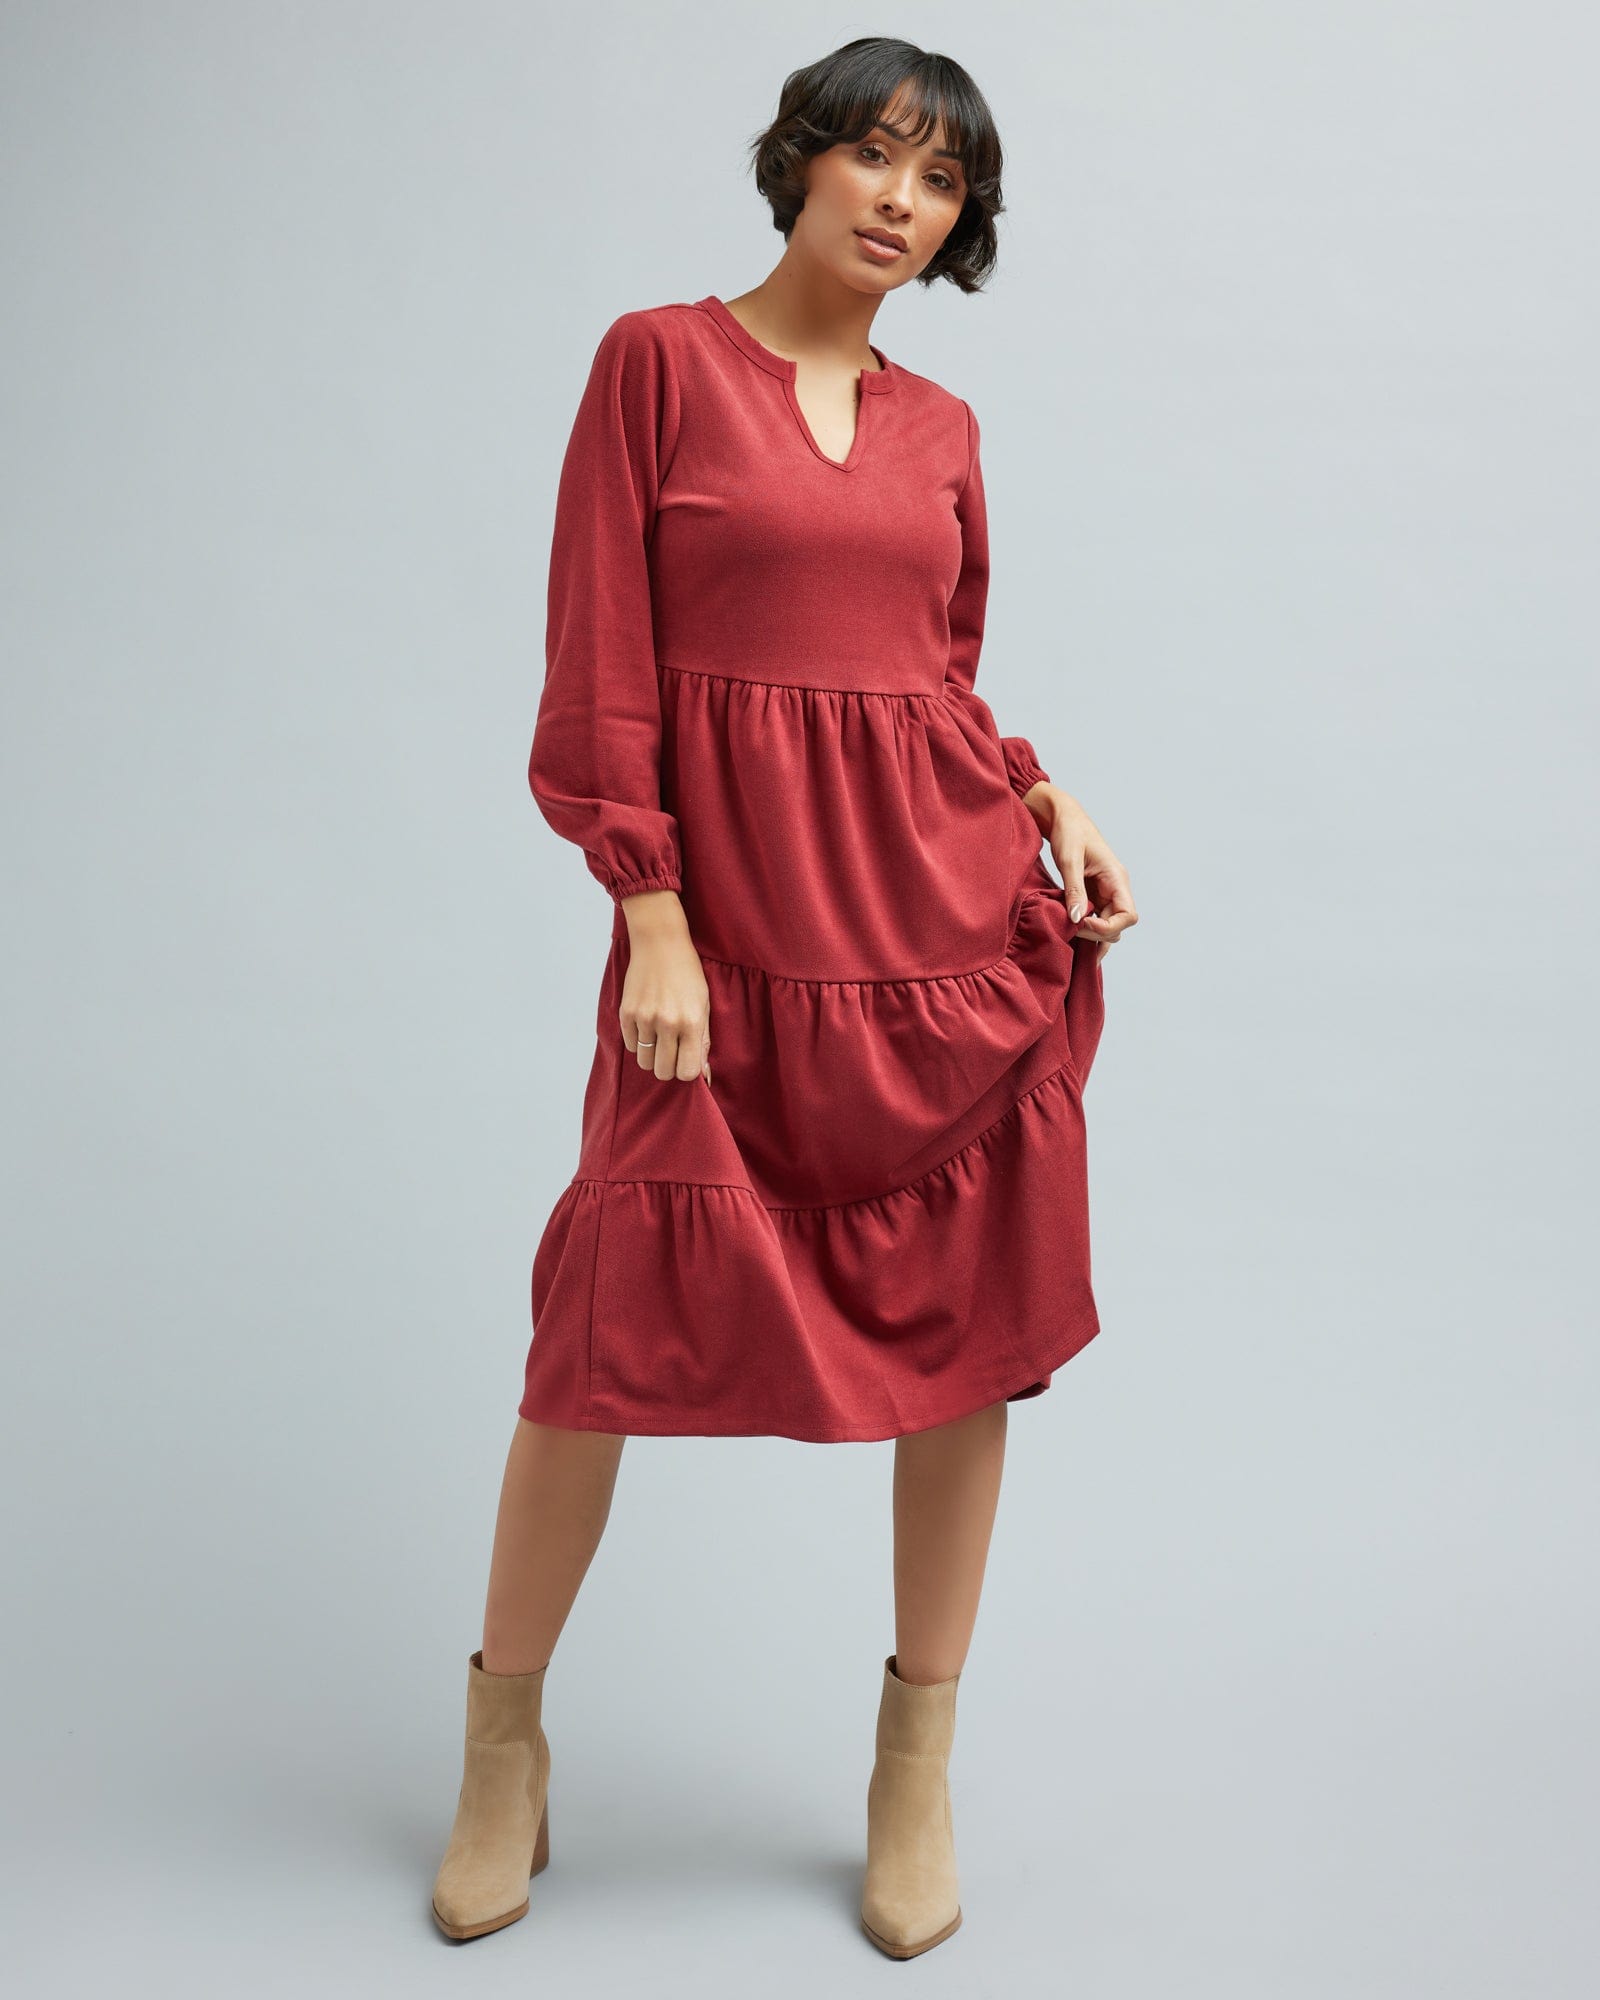 Woman in a long sleeve, tiered skirt, brick red dress.